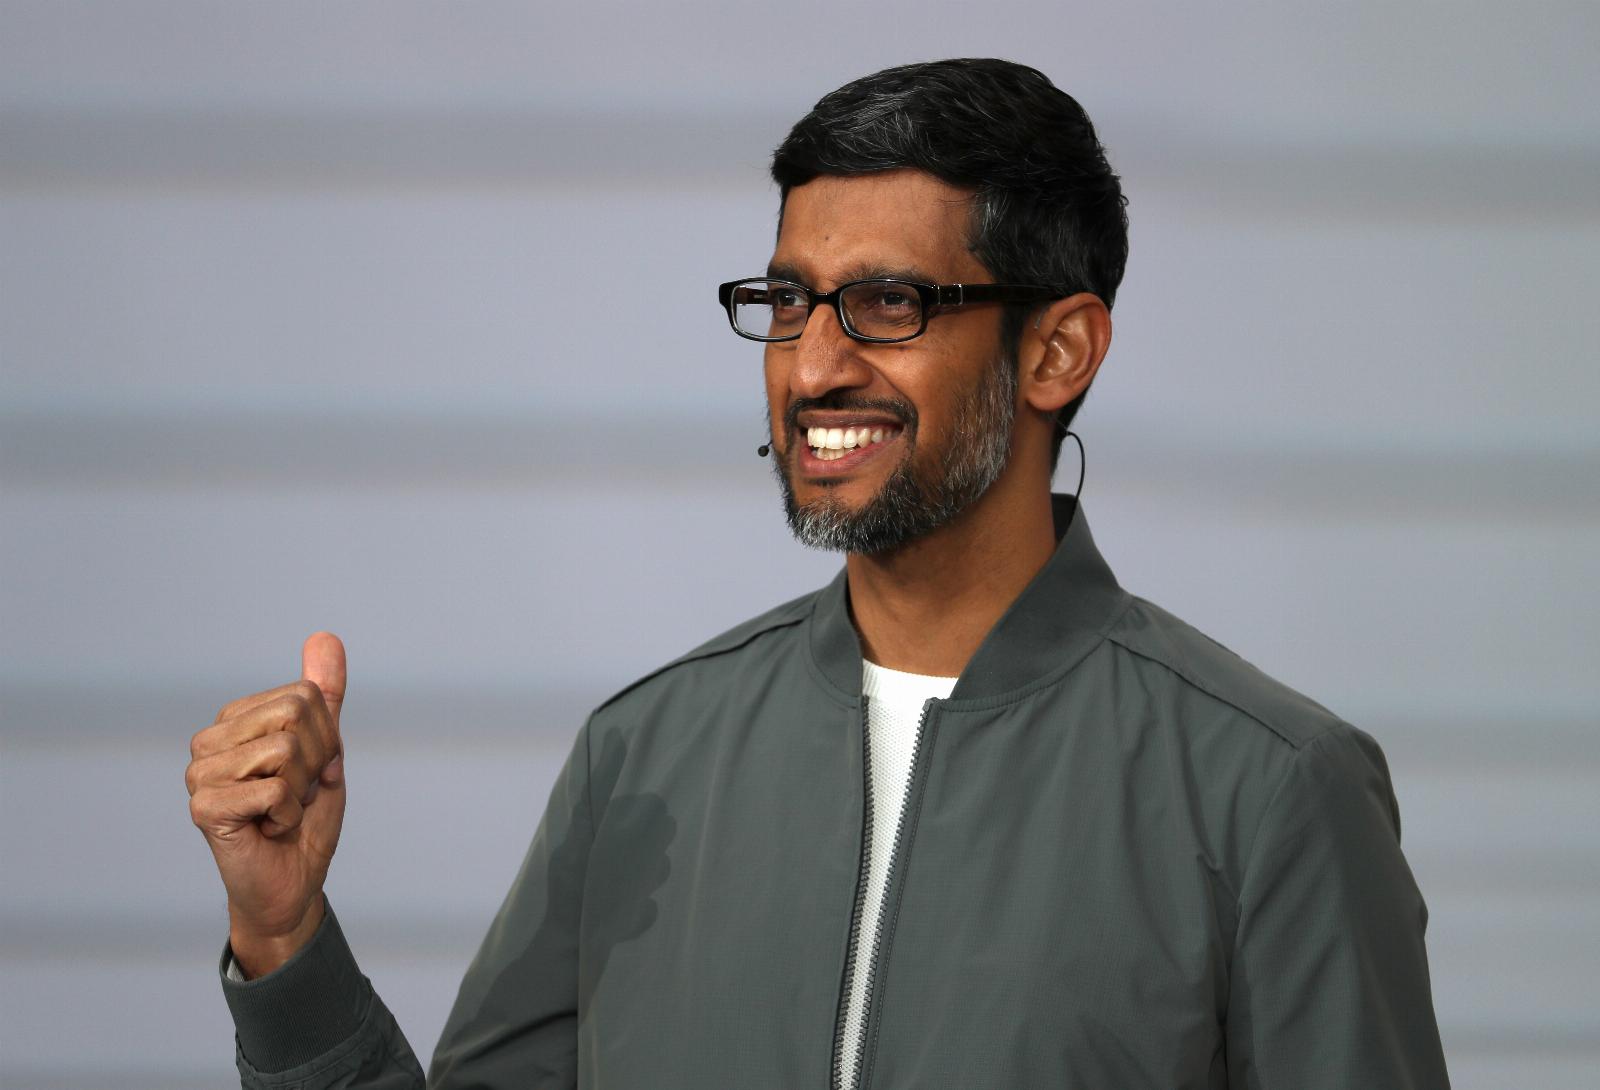 Sundar Pichai on the challenge of innovating in a huge company and what he’s excited about this year